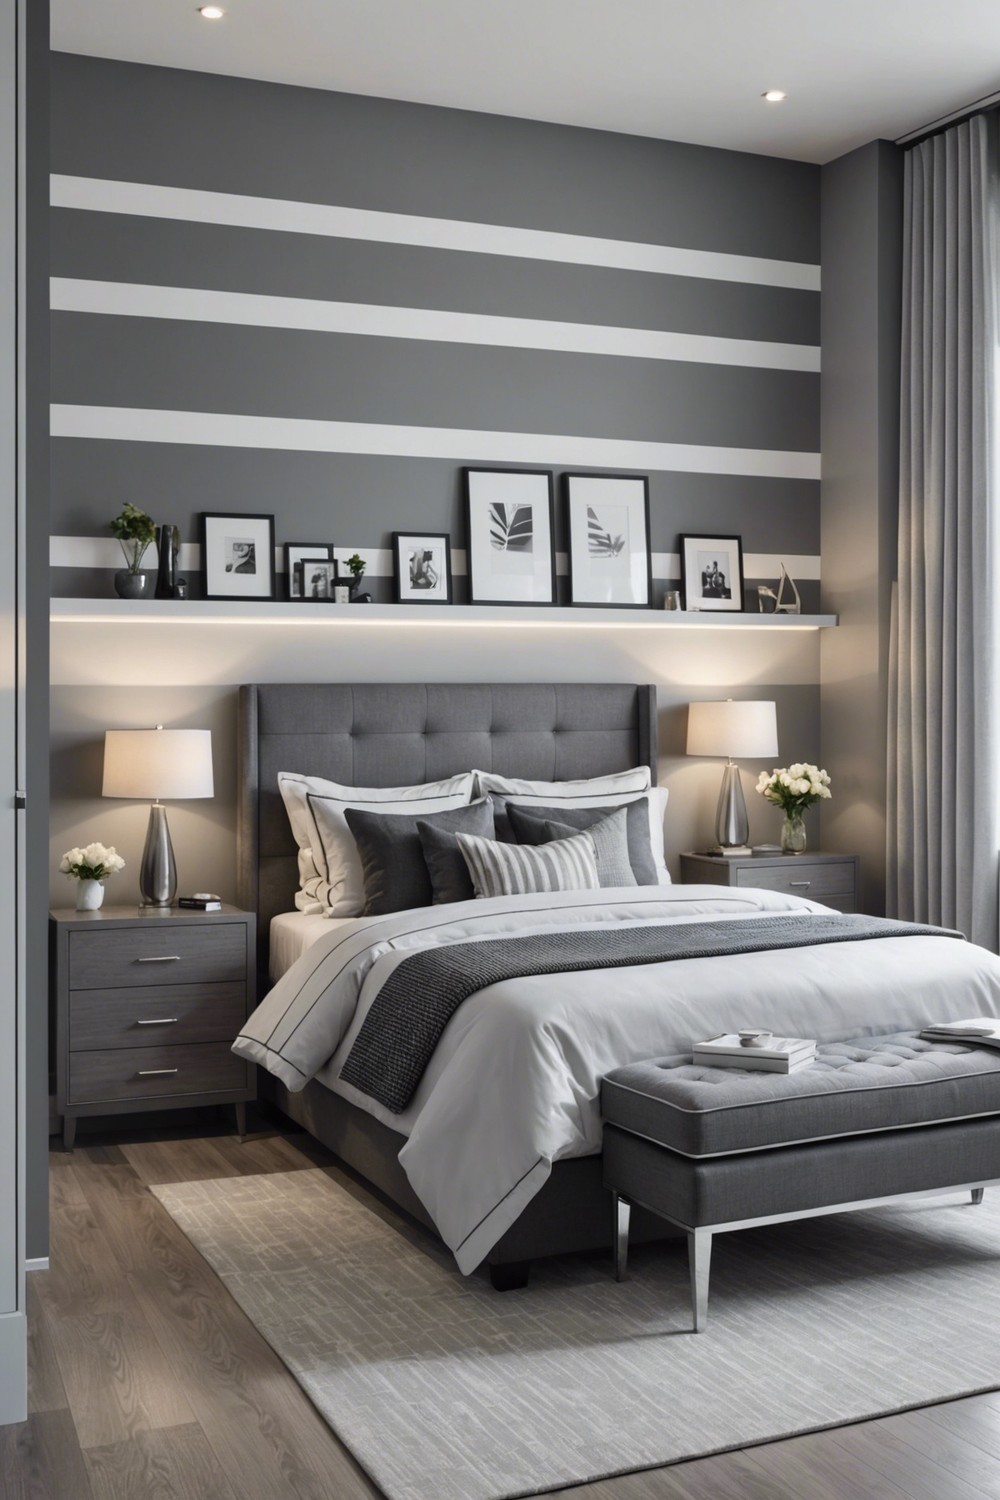 Accent Wall with Grey and White Stripes